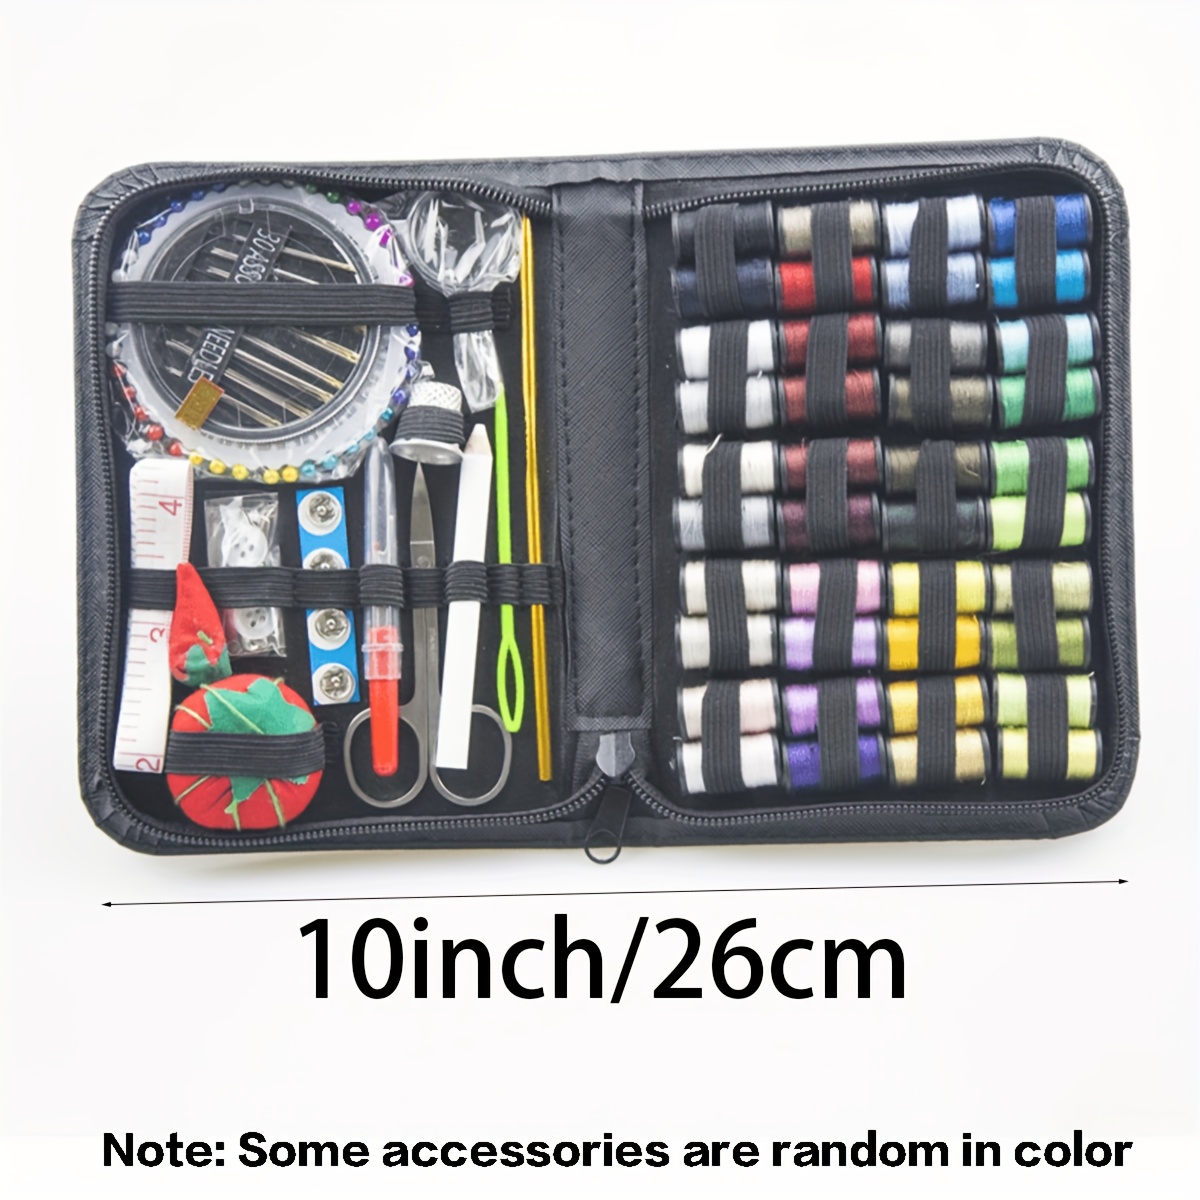 portable sewing kit over 100 supplies